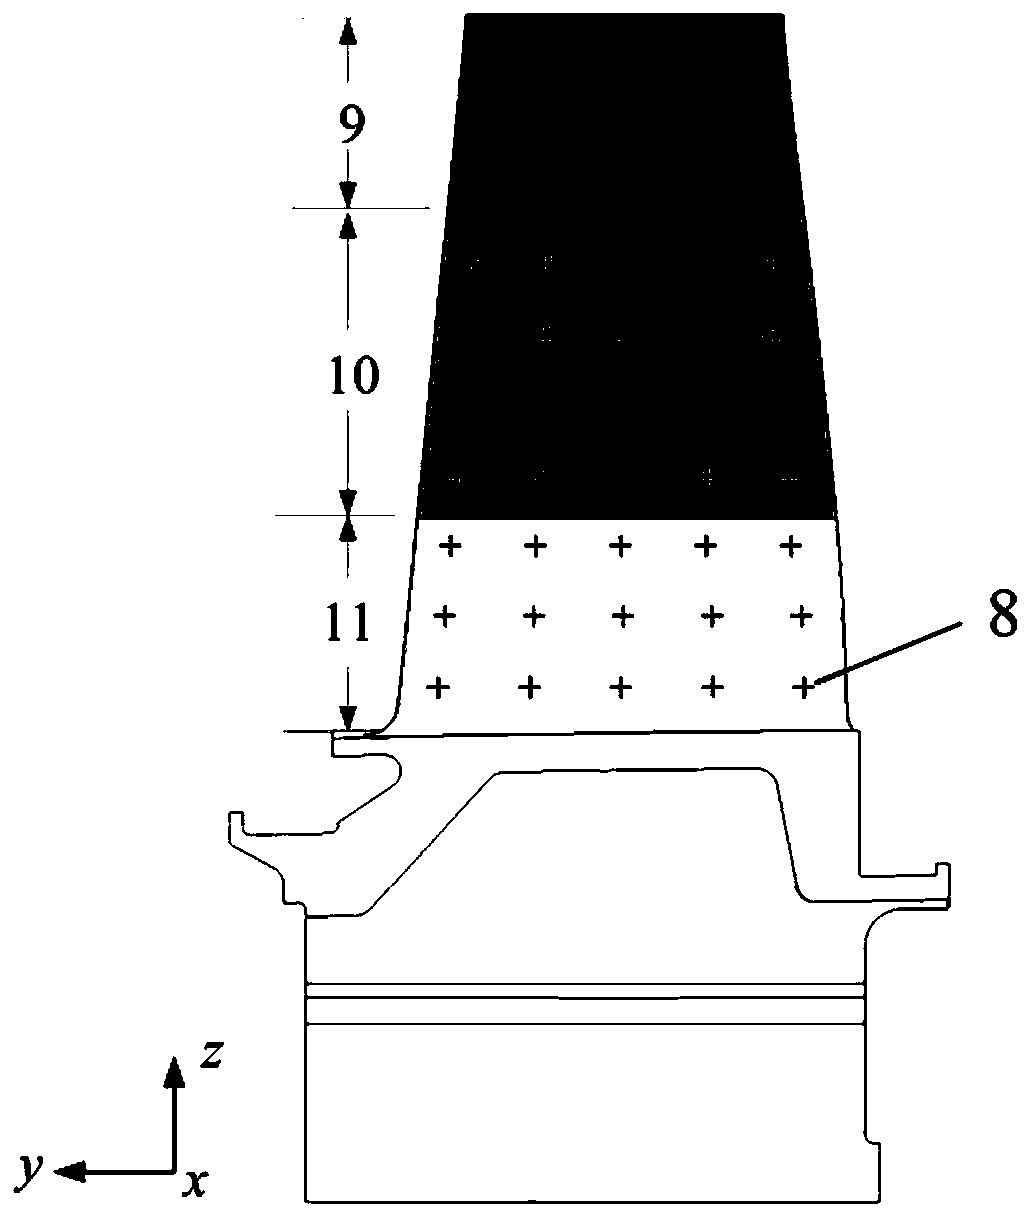 A Thickness Optimization Design Method of Turbine Blade Thermal Barrier Coating